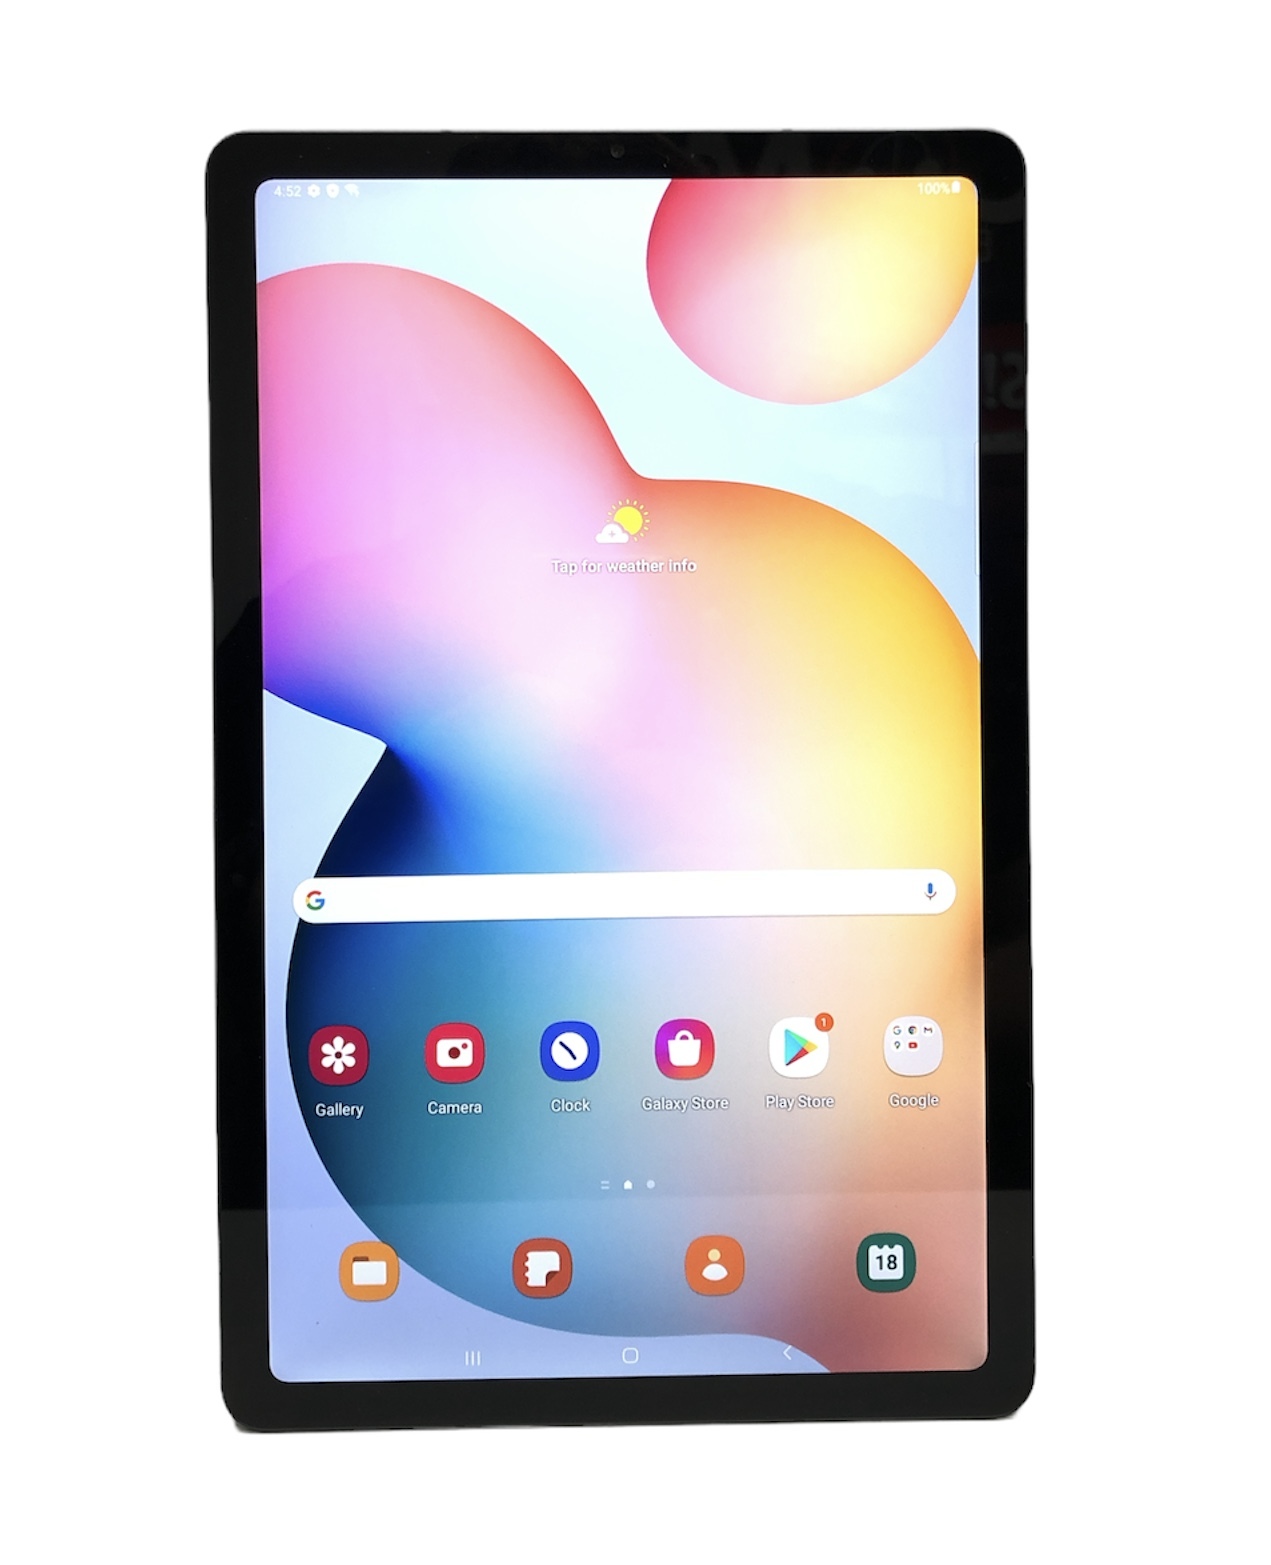 Primary image for Samsung Tablet Galaxy tab s6 lite 333178